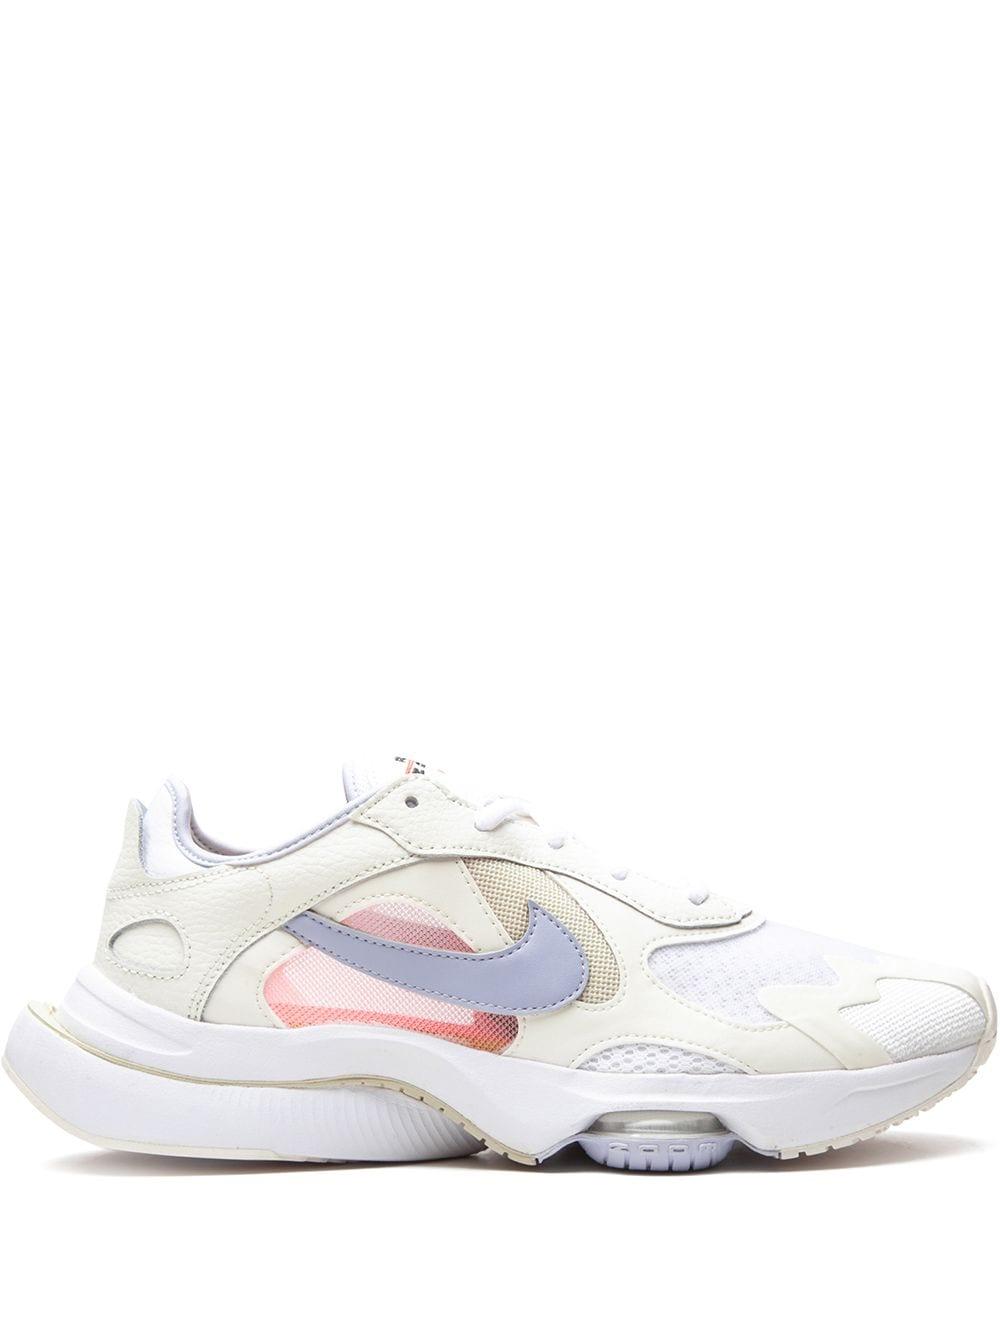 Nike Air Zoom Division Sneakers in White | Lyst Australia